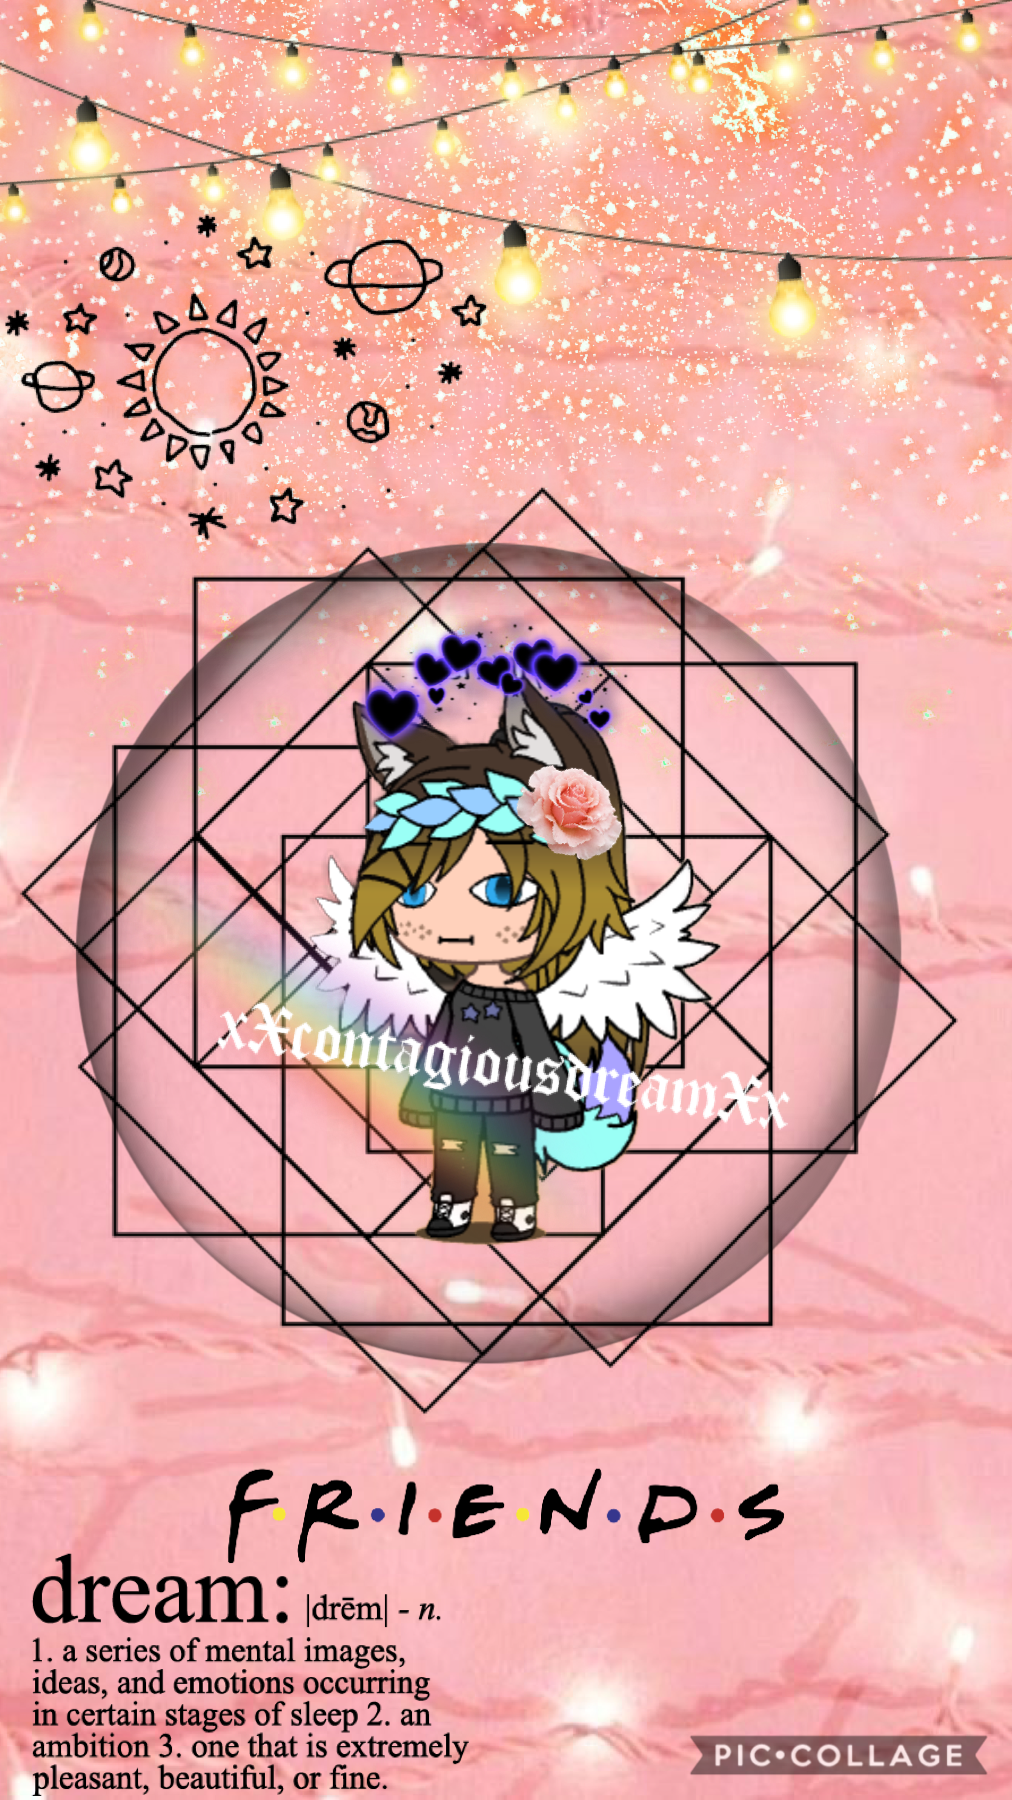 🖤Tap🖤

New profile pic what do you think? I will try and get a better gacha life character but this’ll have to do I guess